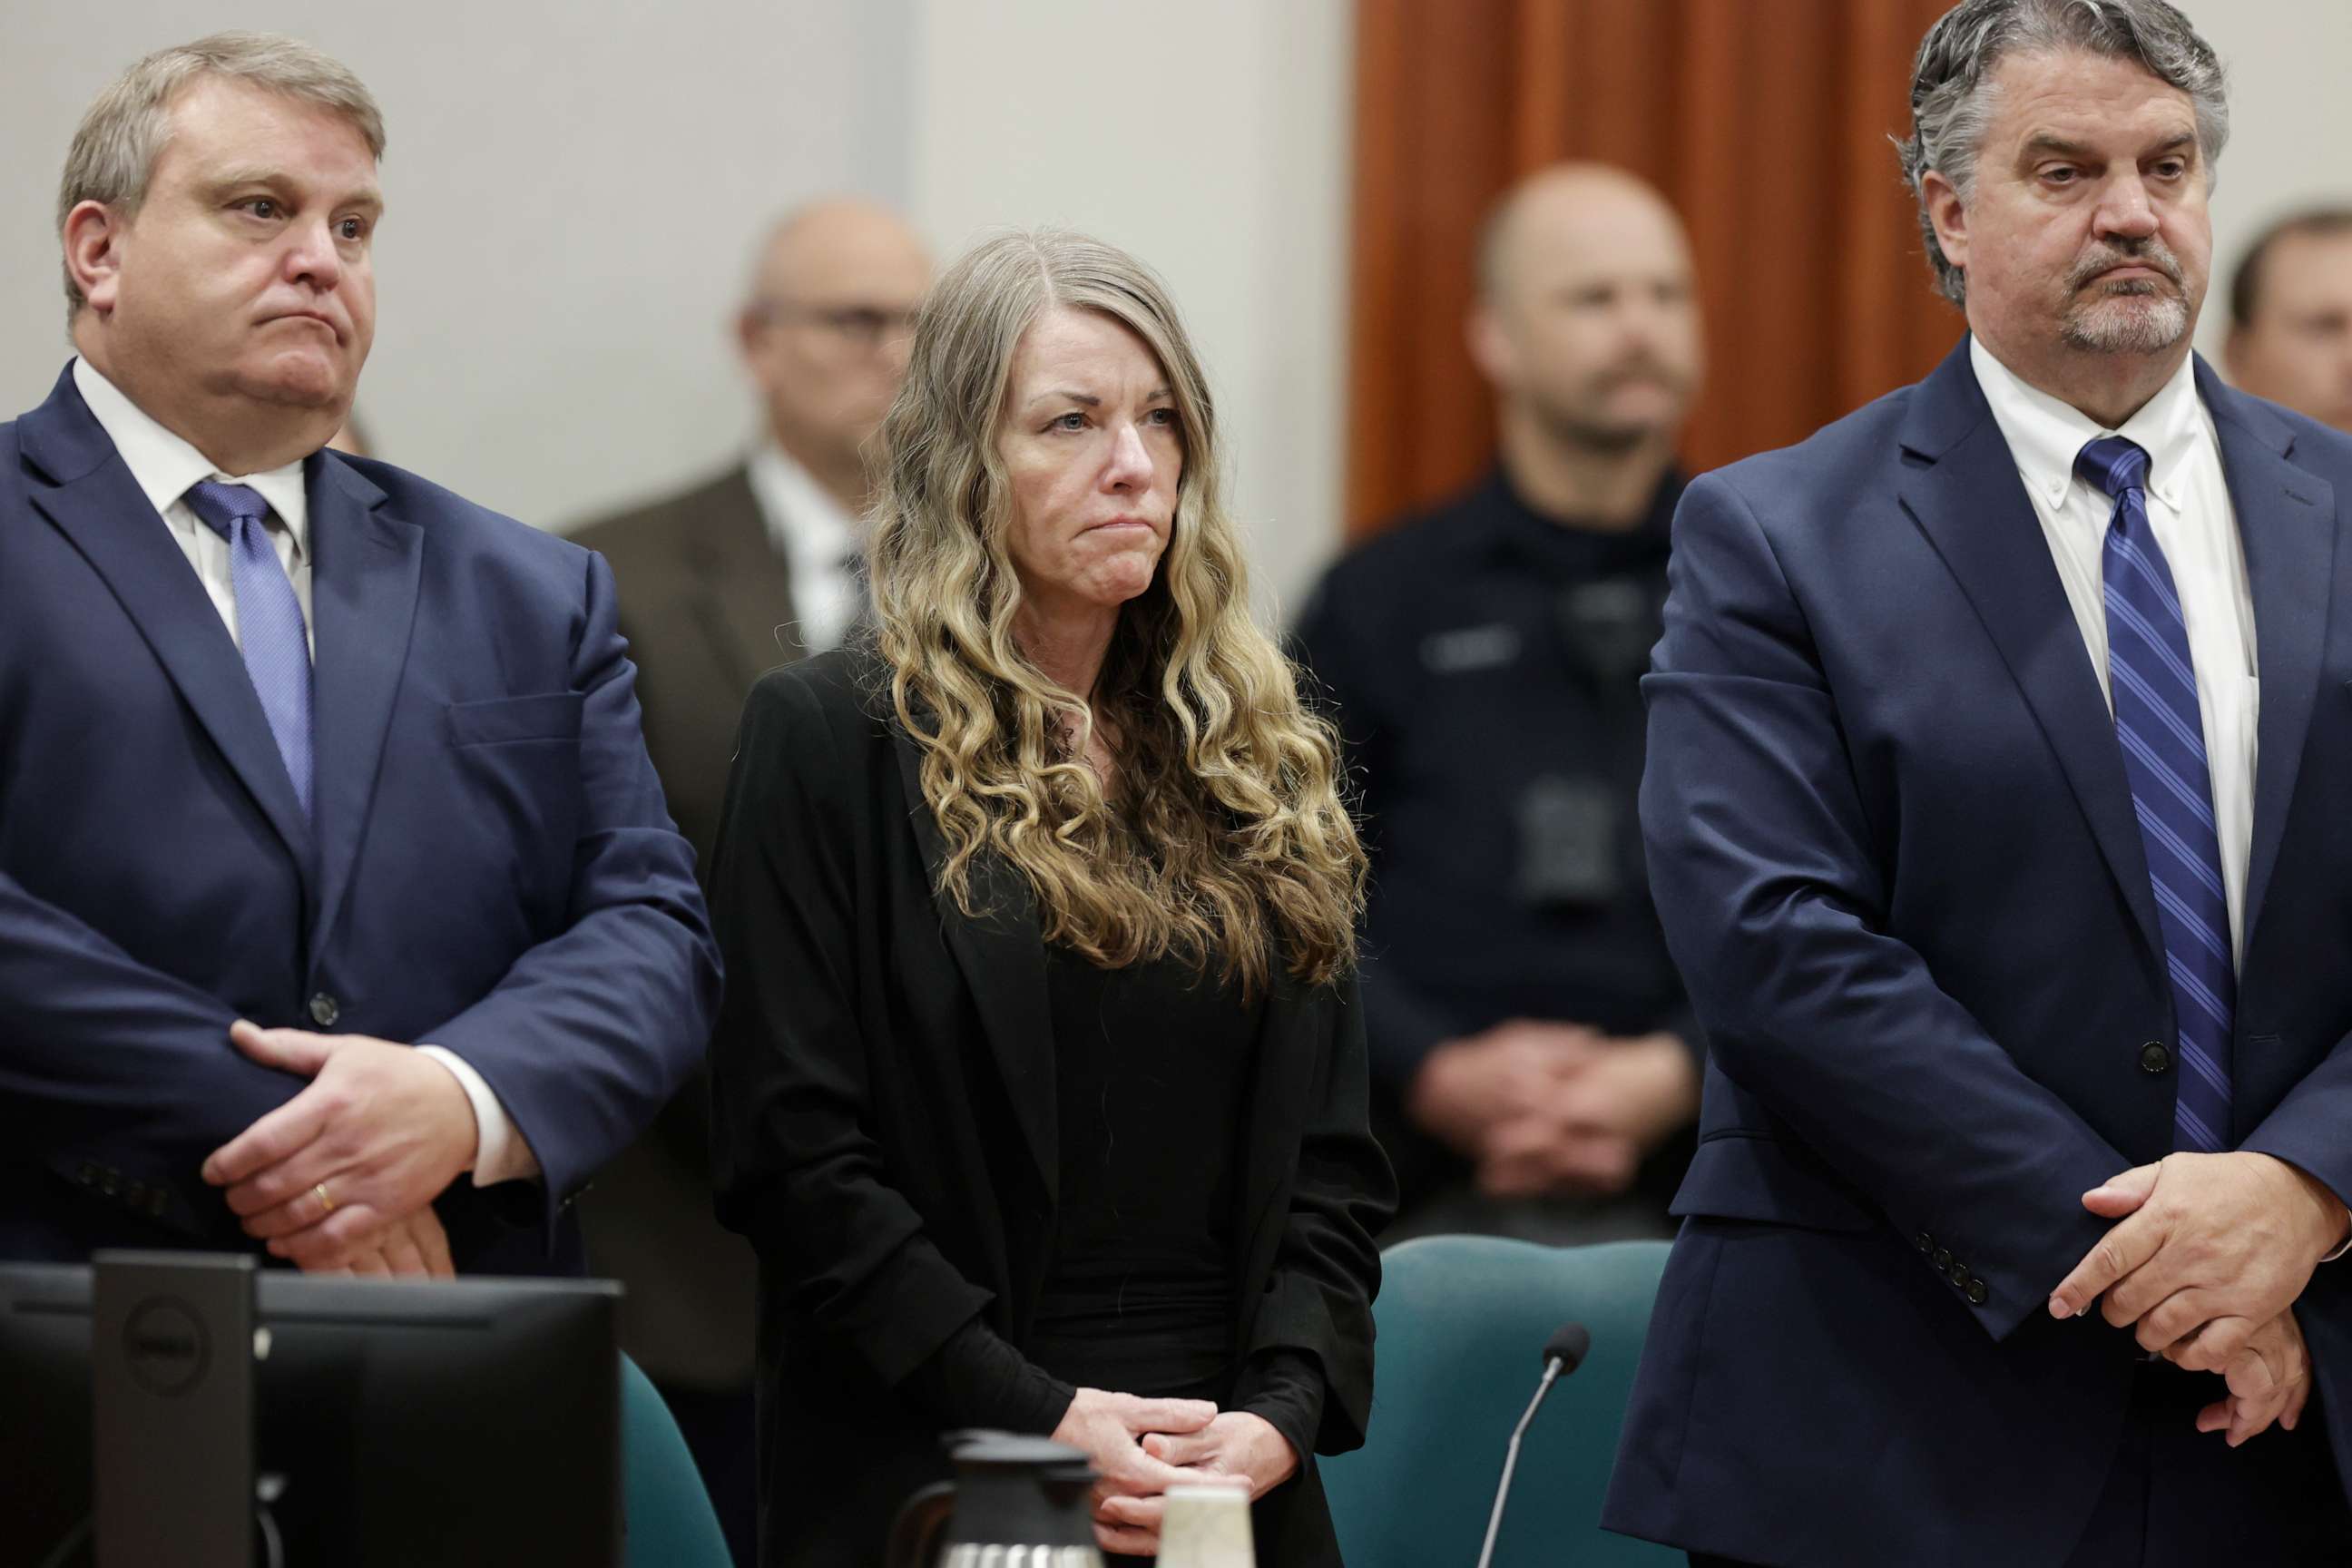 PHOTO: Lori Vallow Daybell stands and listens as the jury's verdict is read at the Ada County Courthouse in Boise, Idaho on Friday May 12, 2023. The Idaho jury convicted Daybell of murder in the deaths of her two youngest children.